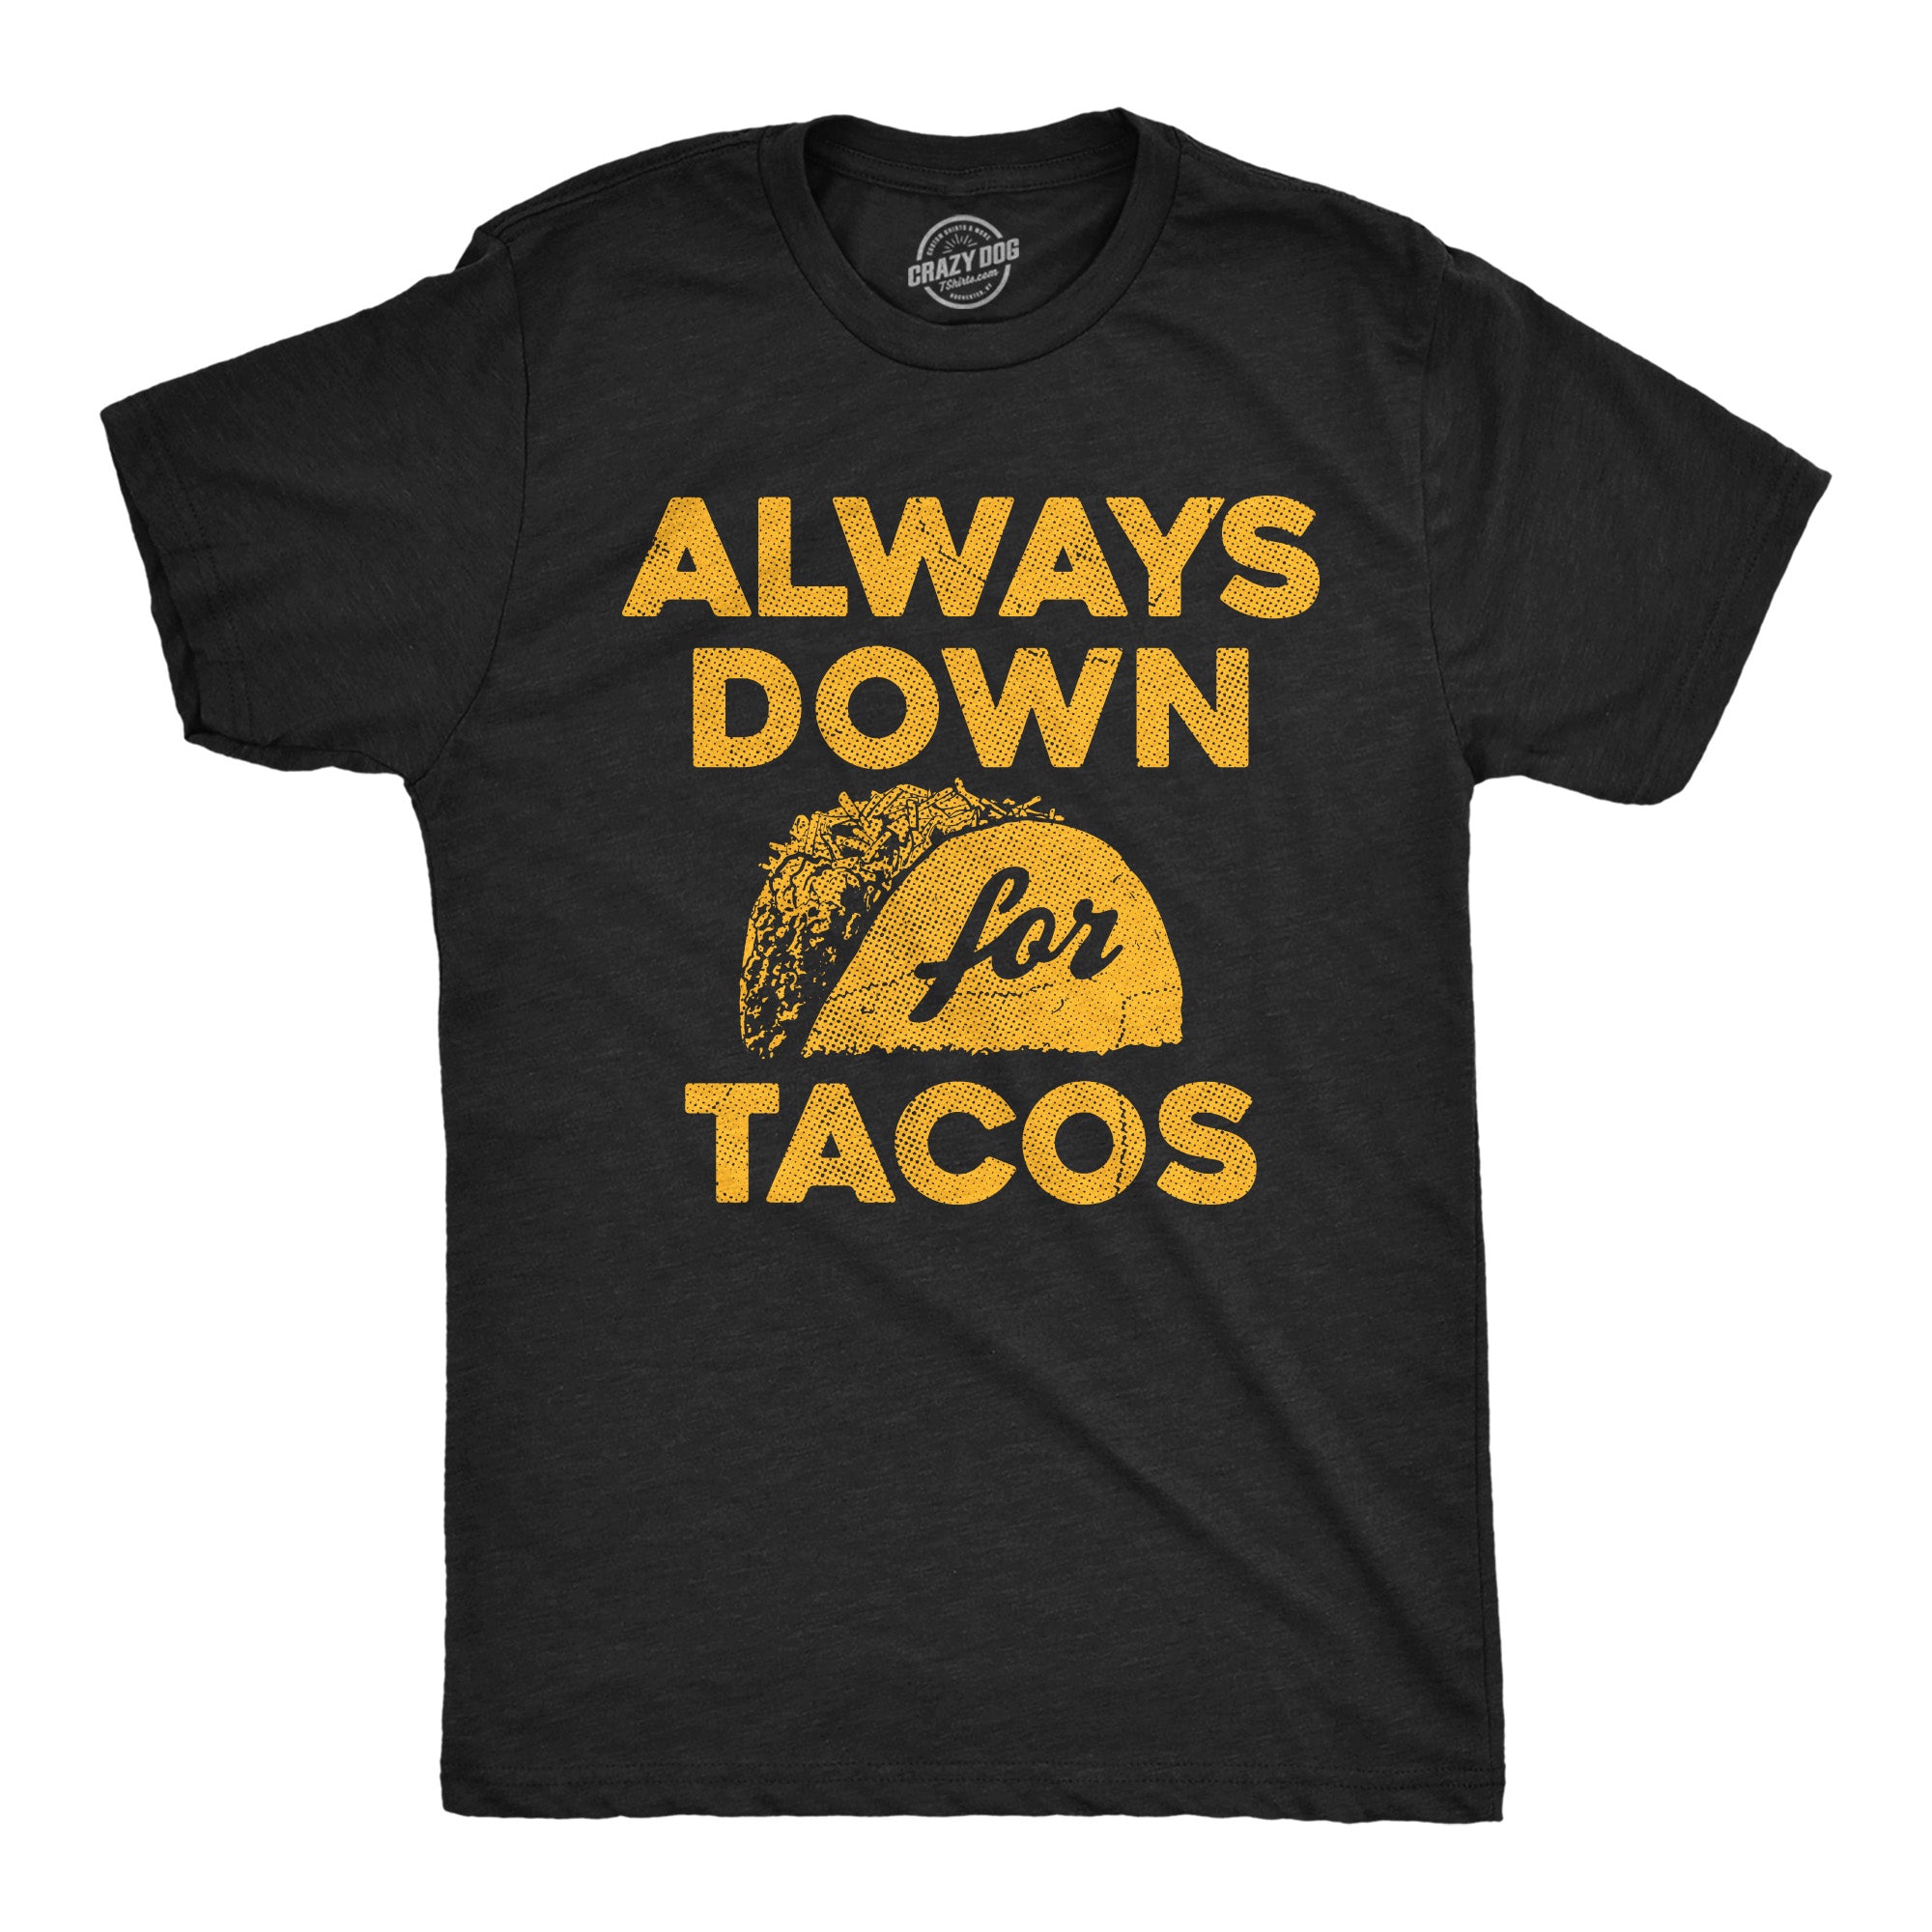 Funny Heather Black - Always Down For Tacos Always Down For Tacos Mens T Shirt Nerdy Food Tee